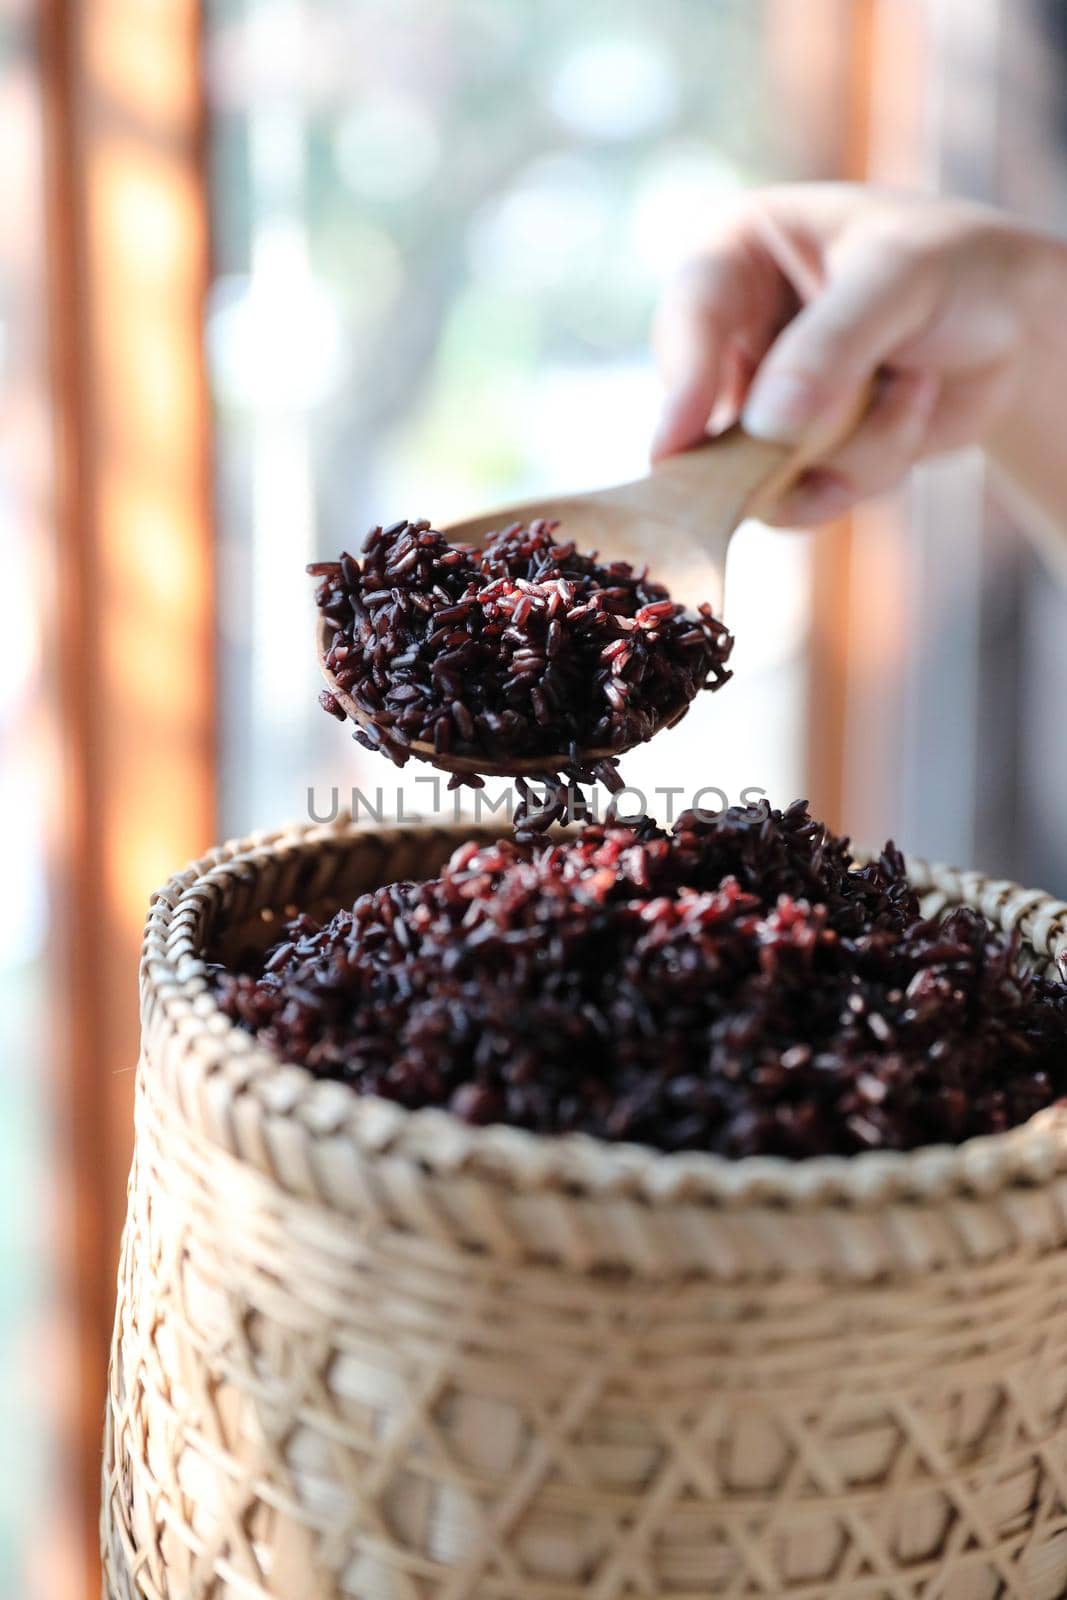 Boiled riceberry rice on wood basket with spoon in close up by piyato